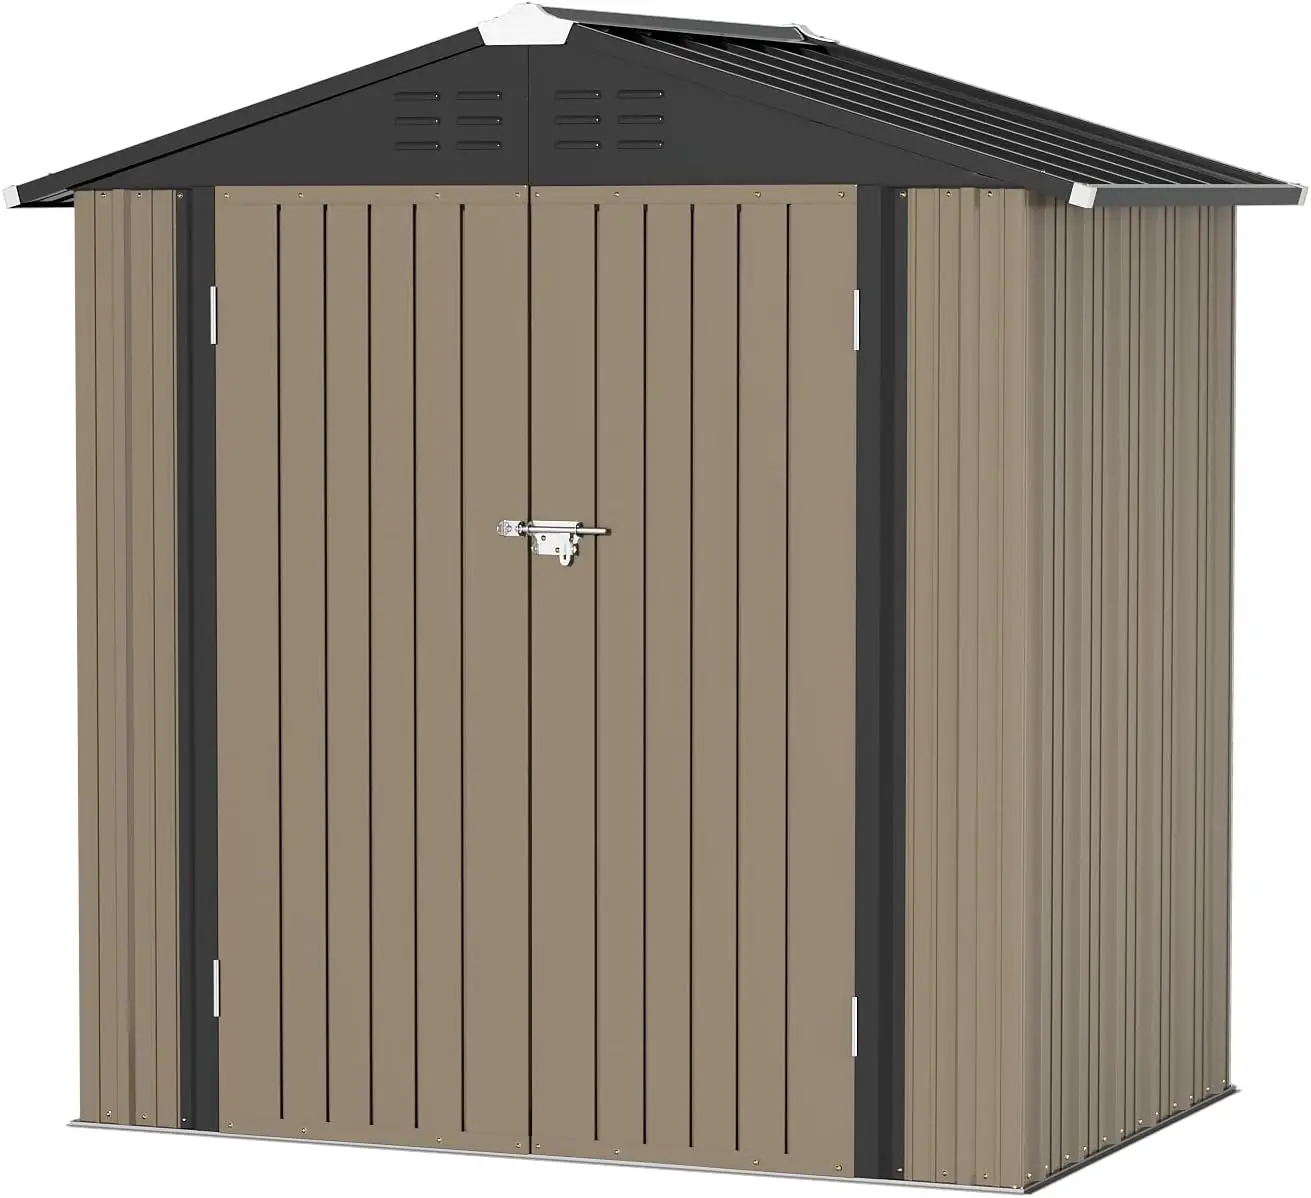 

Metal Outdoor Storage Shed 6FT x 4FT, Steel Utility Tool Shed Storage House with Door & Lock for Backyard Garden Patio Lawn